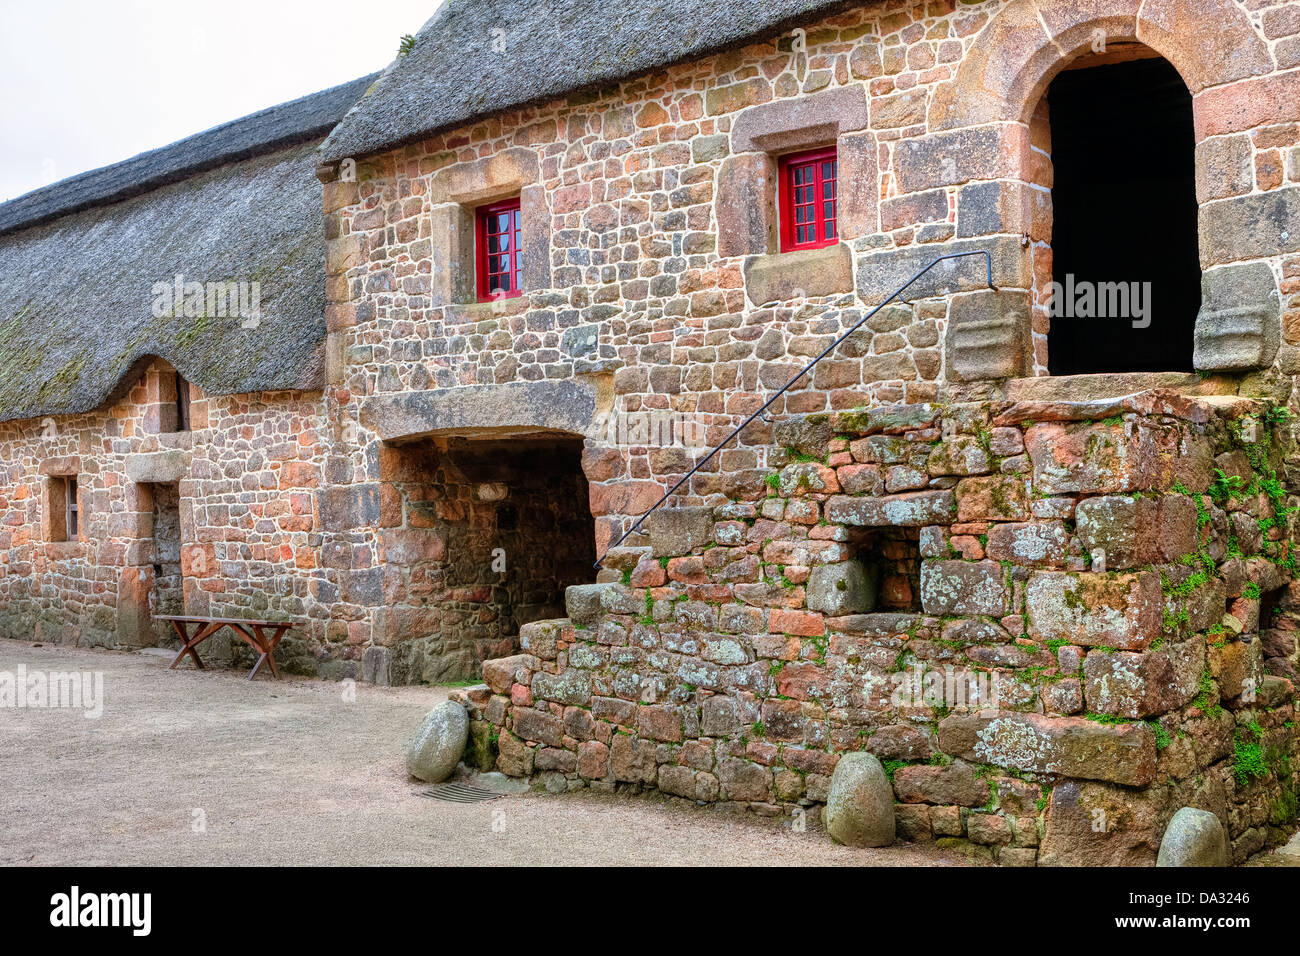 Hamptonne Country Life Museum, Jersey, United Kingdom Banque D'Images